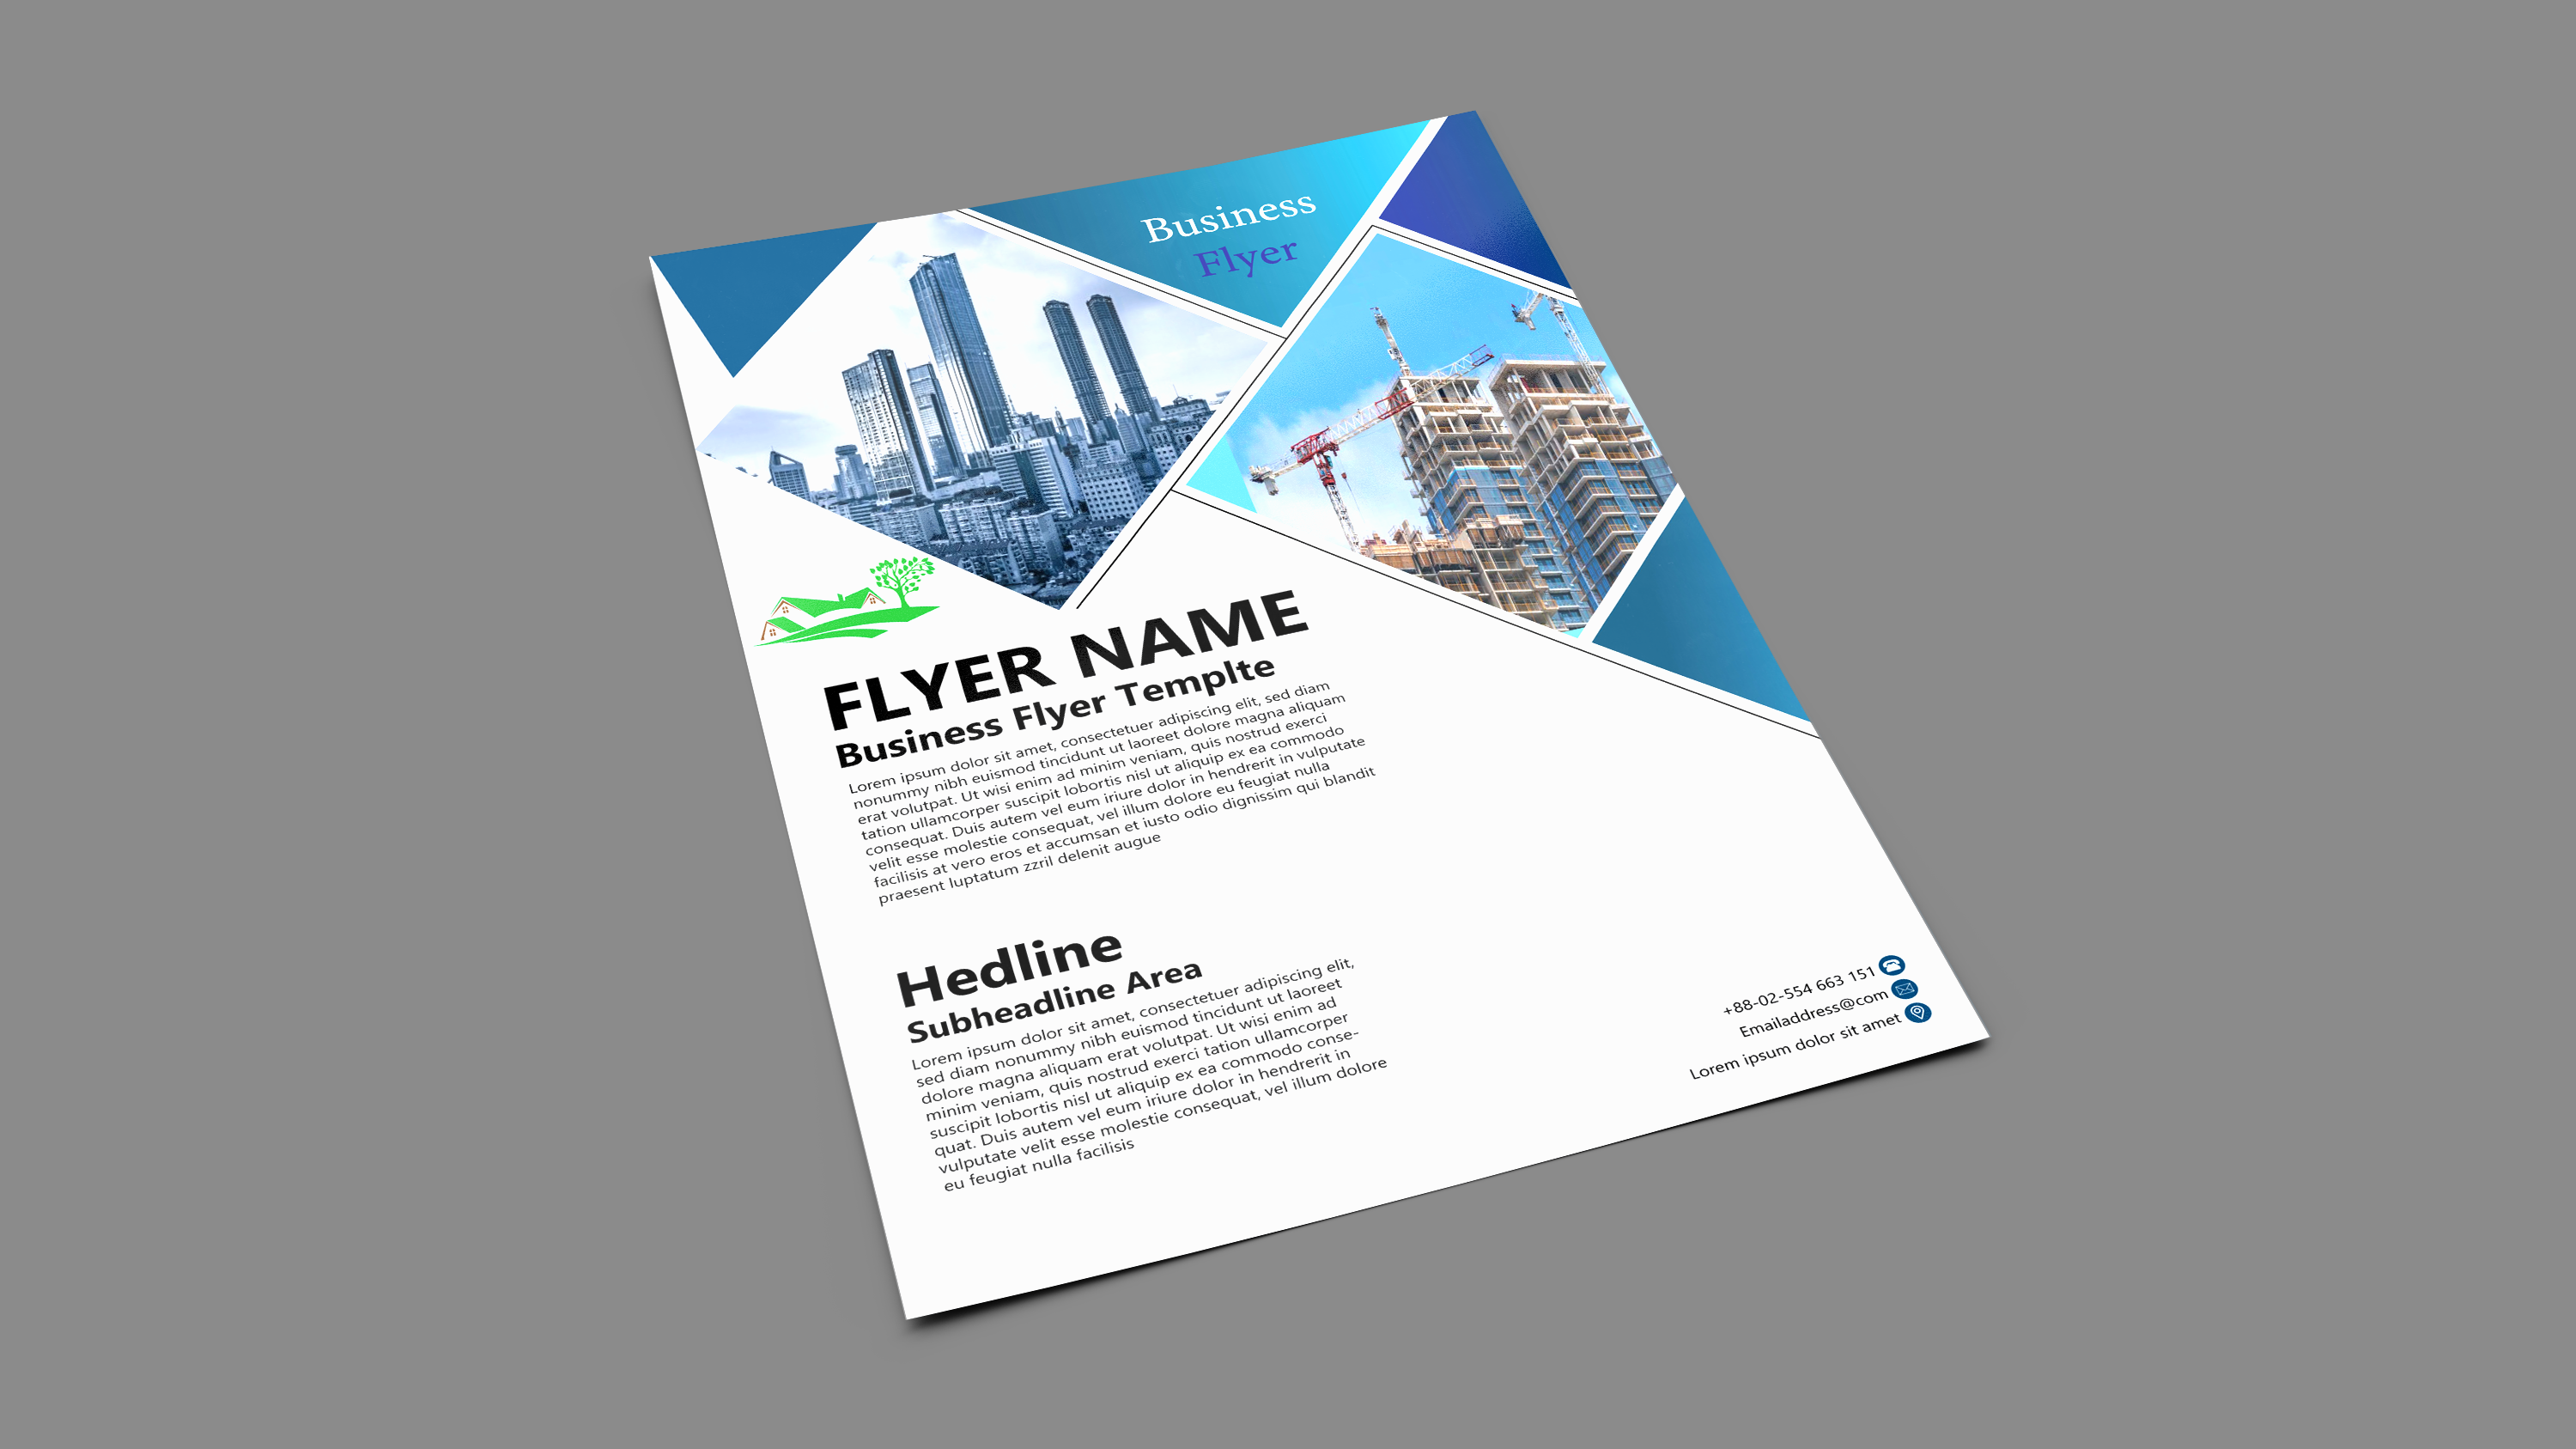 5455I will design professional business flyer in 24 hours